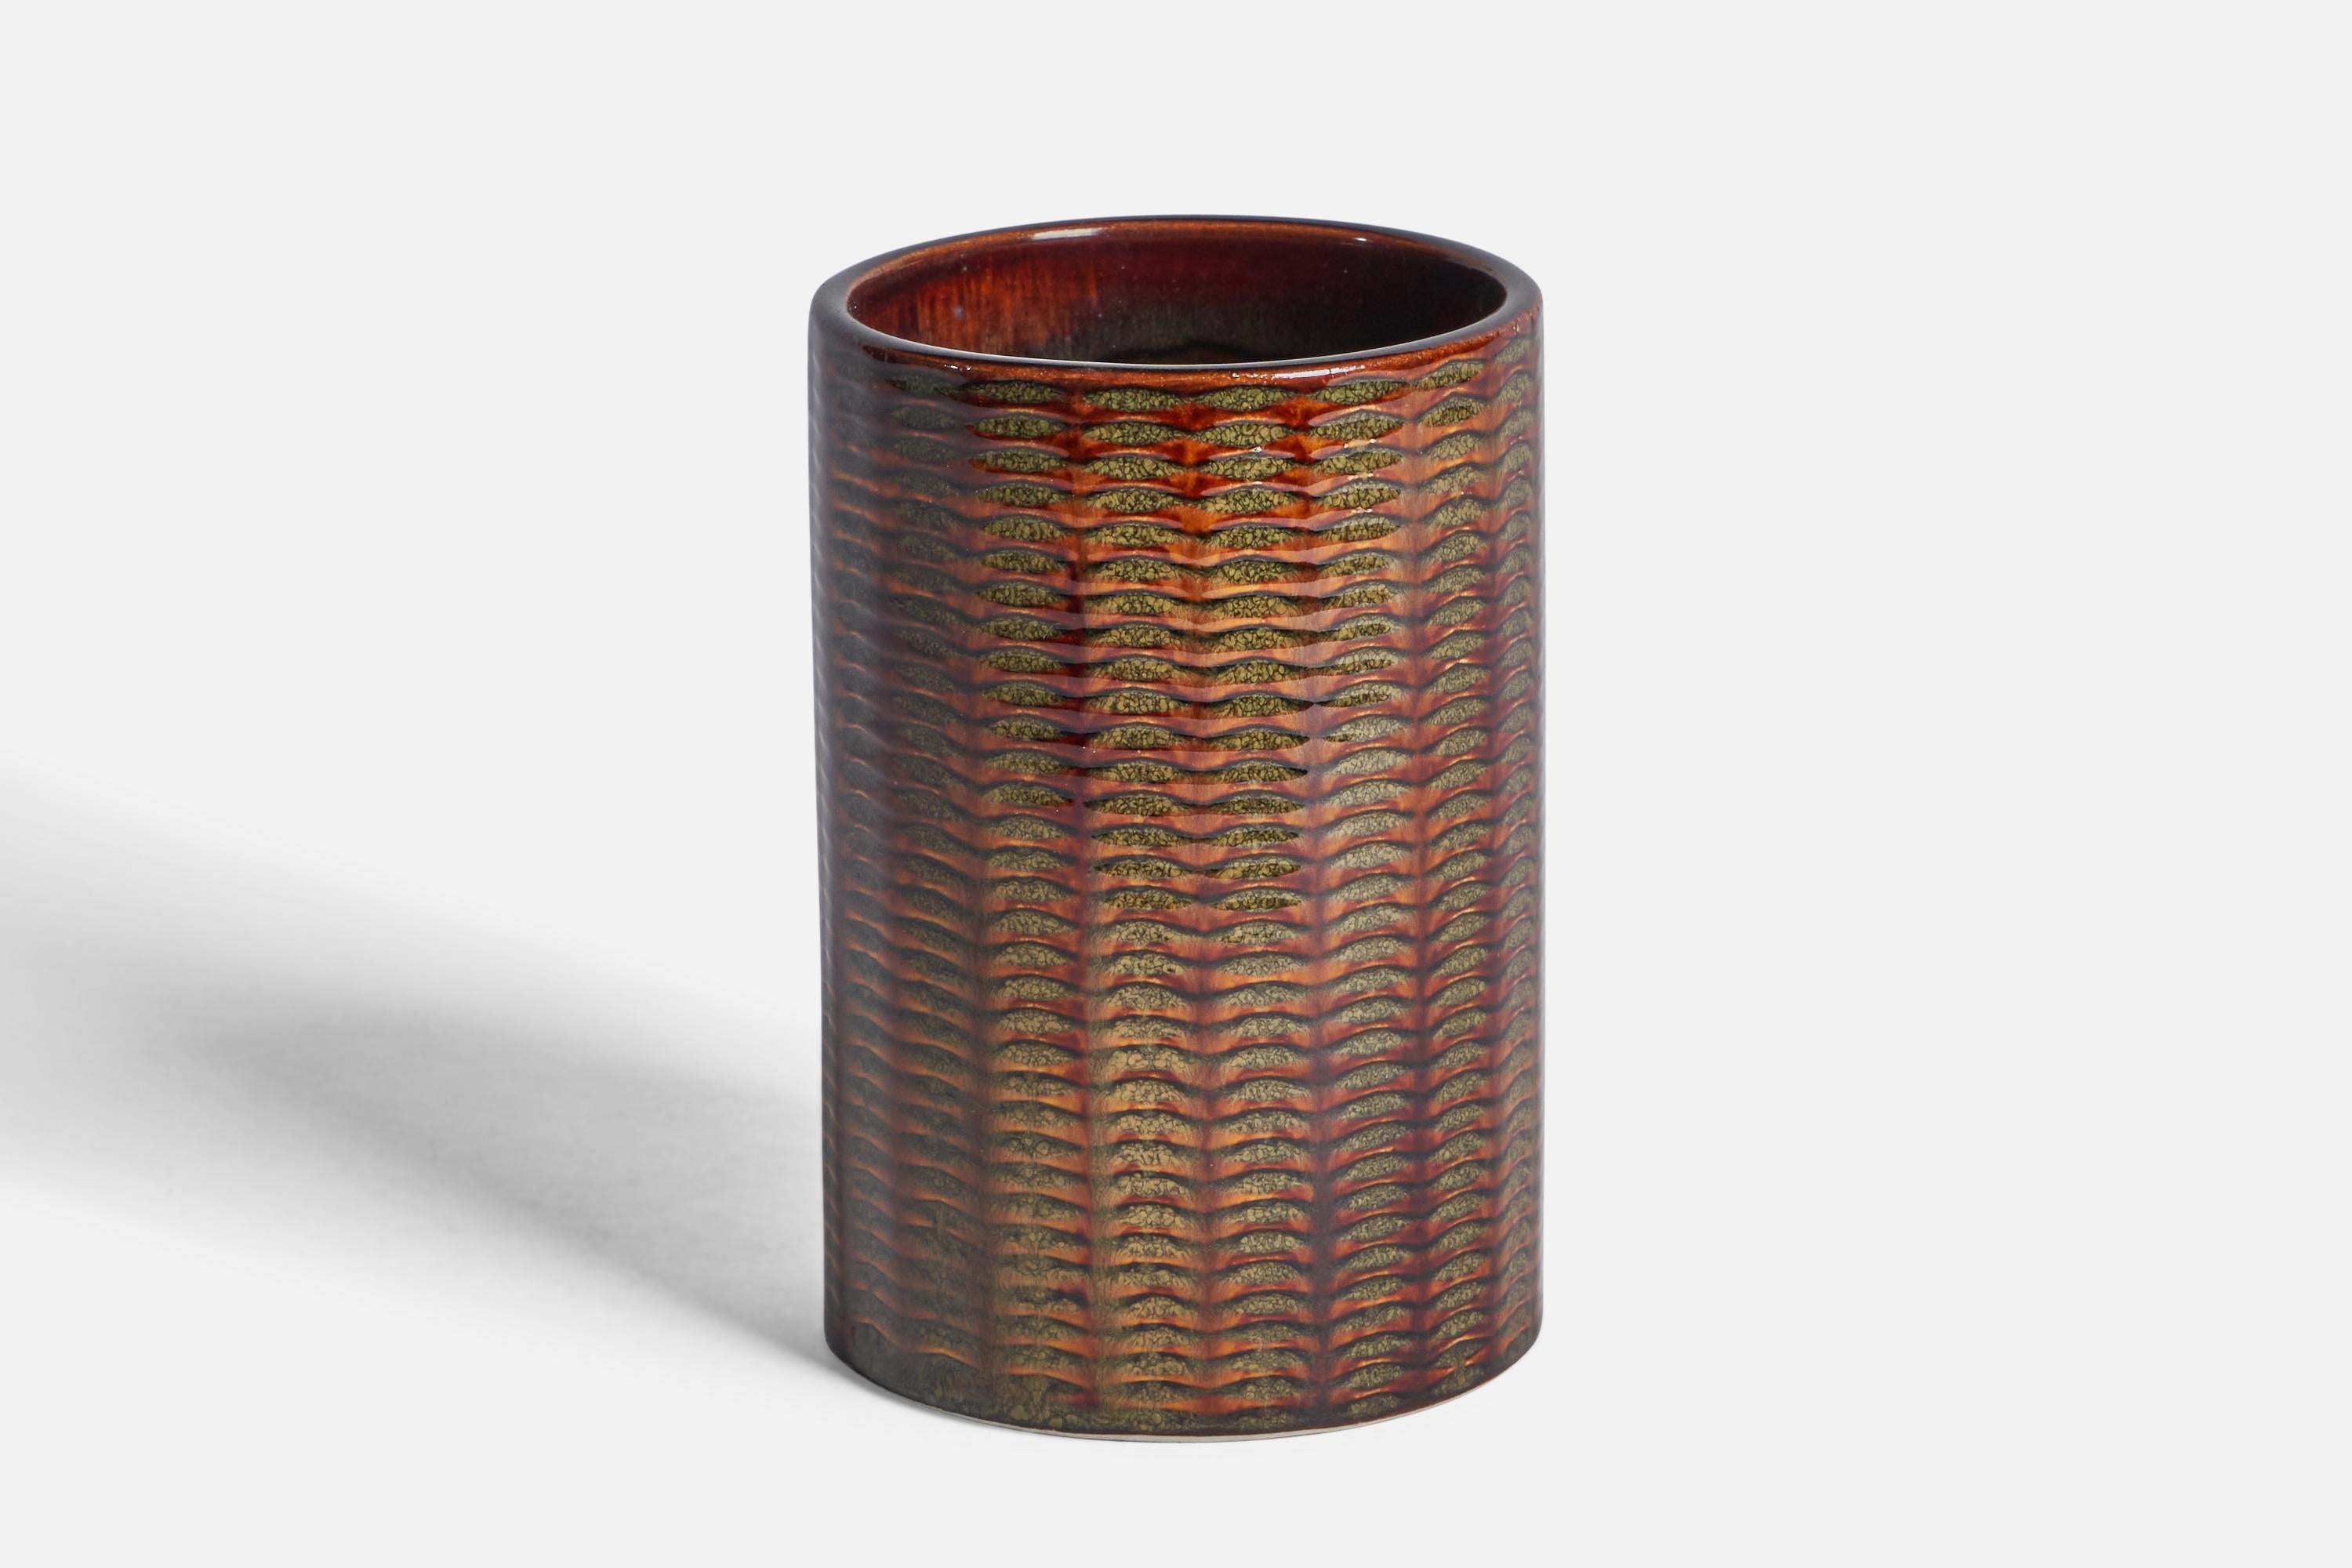 A red and green-glazed stoneware vase designed by Stig Lindberg and produced by Gustavsberg, c. 1960s.